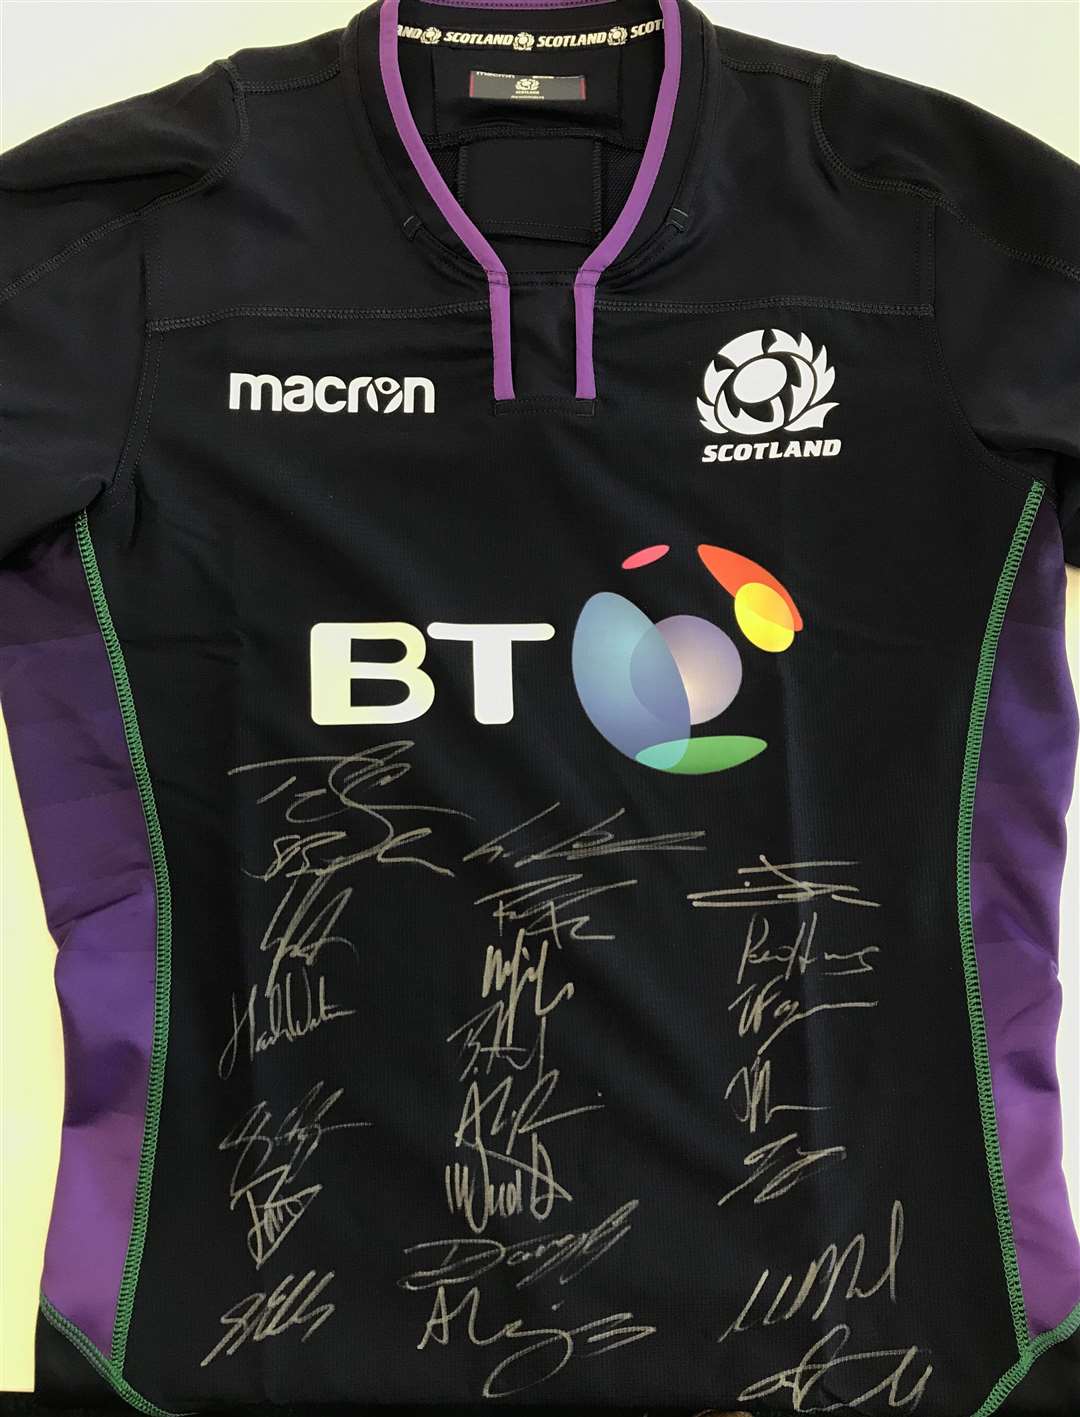 A signed Scotland rugby top has been donated by the SRU.